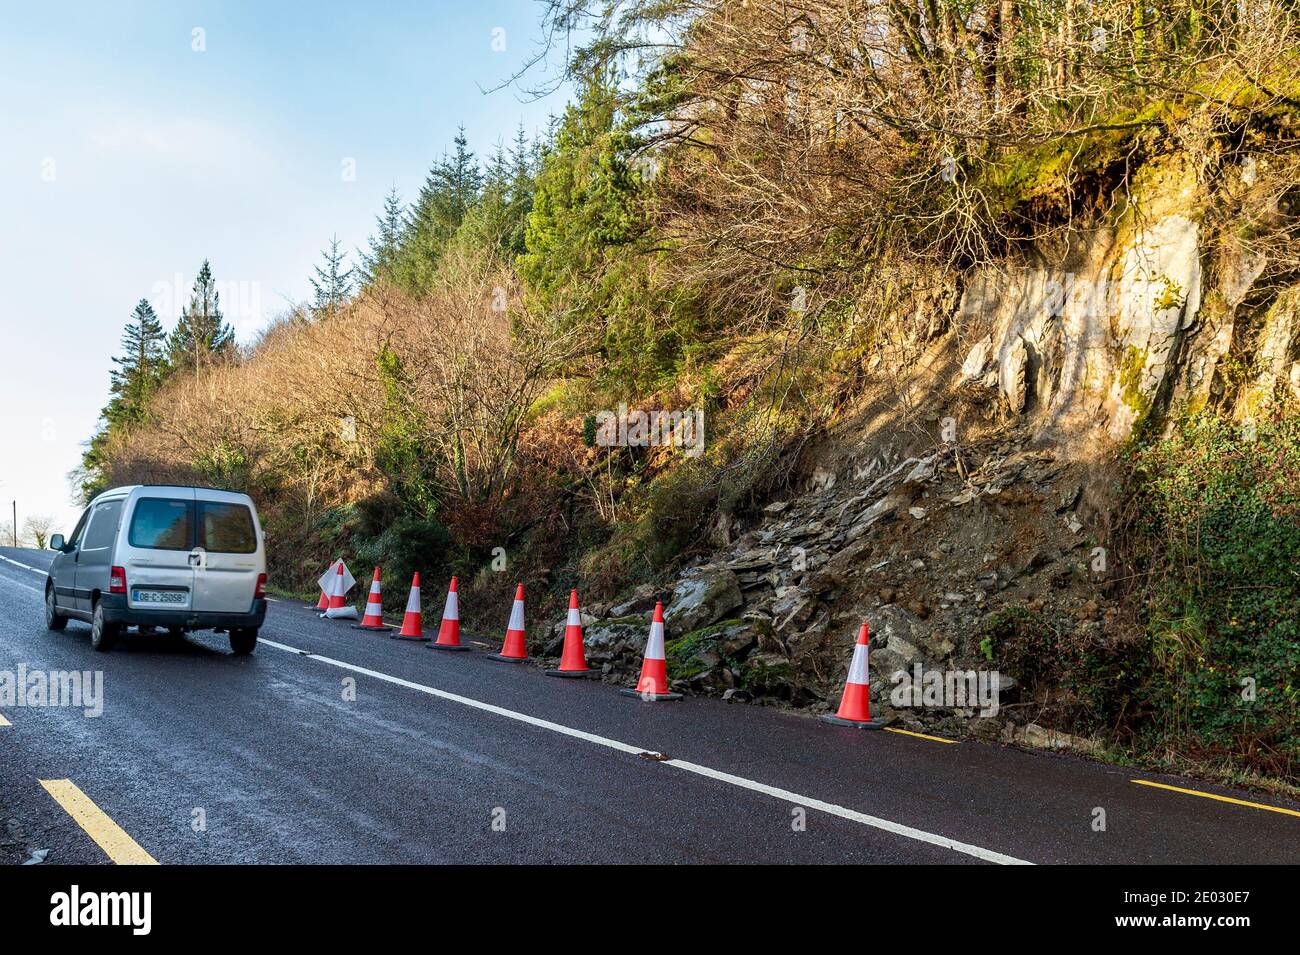 Gloundha, West Cork, Ireland. 29th Dec, 2020. Due to recent torrential rain, a small landslide occurred overnight on the R586 at Gloundha, between Drimoleague and Dunmanway. The county council have placed traffic cones around the hazard. Credit: AG News/Alamy Live News Stock Photo